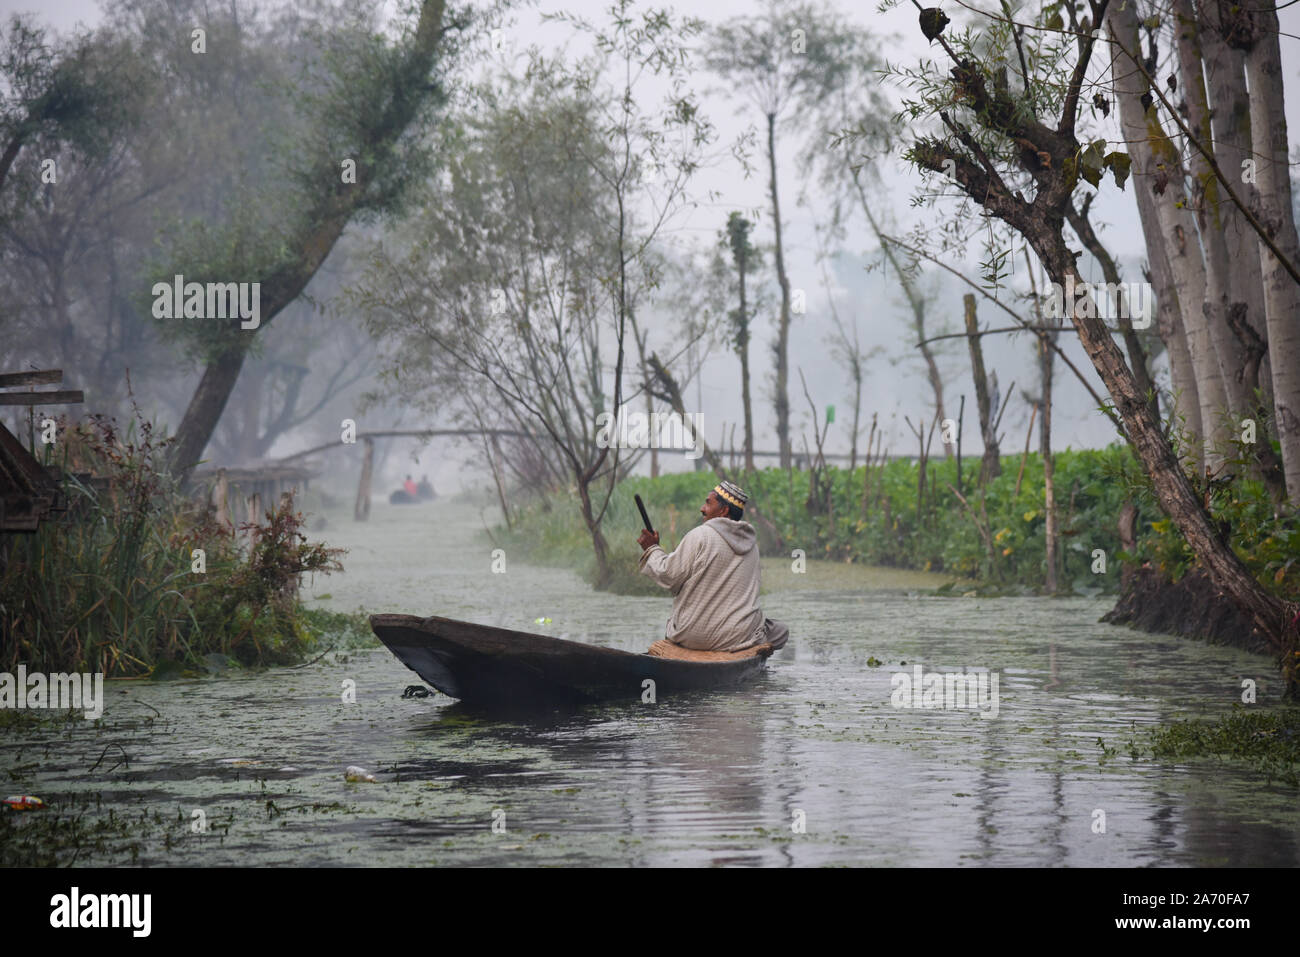 A Kashmiri boatman rows his boat early morning in the interiors of Dal Lake.Kashmir has been divided between India and Pakistan since their partition and independence from Britain in 1947. The disputed region is claimed in full by both sides, which have fought three wars over it. Stock Photo